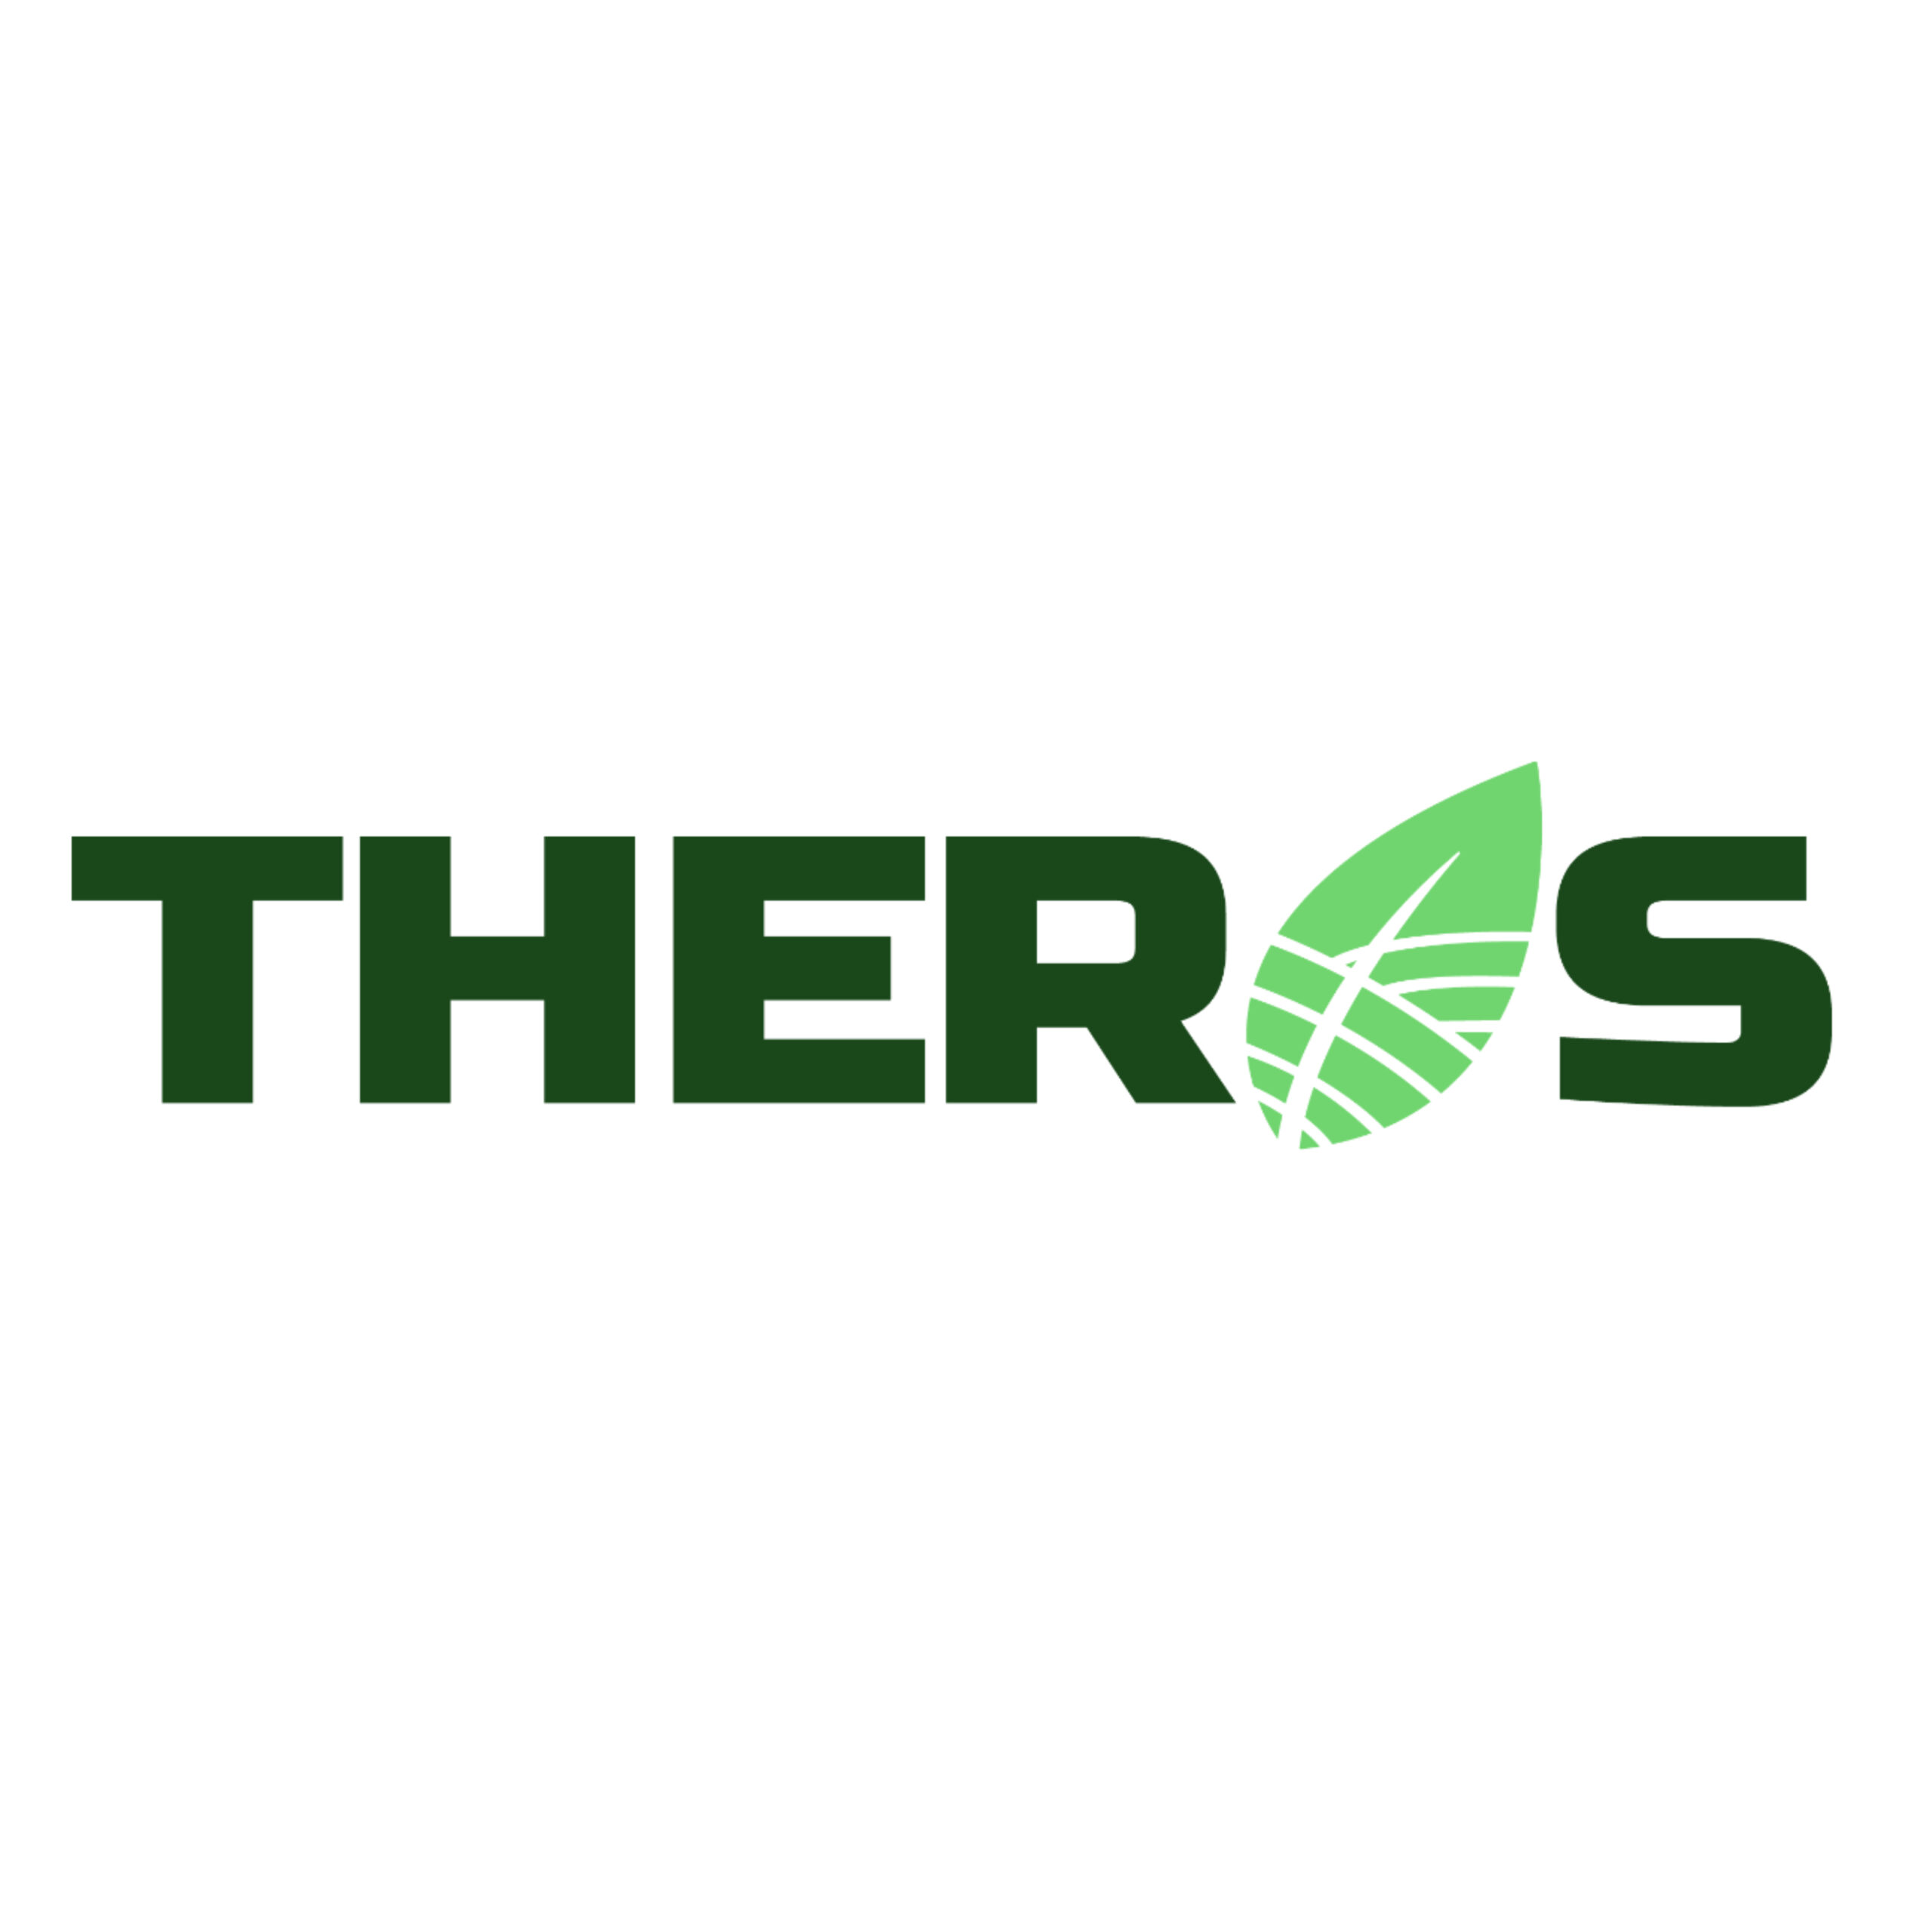 Read more about the article THEROS